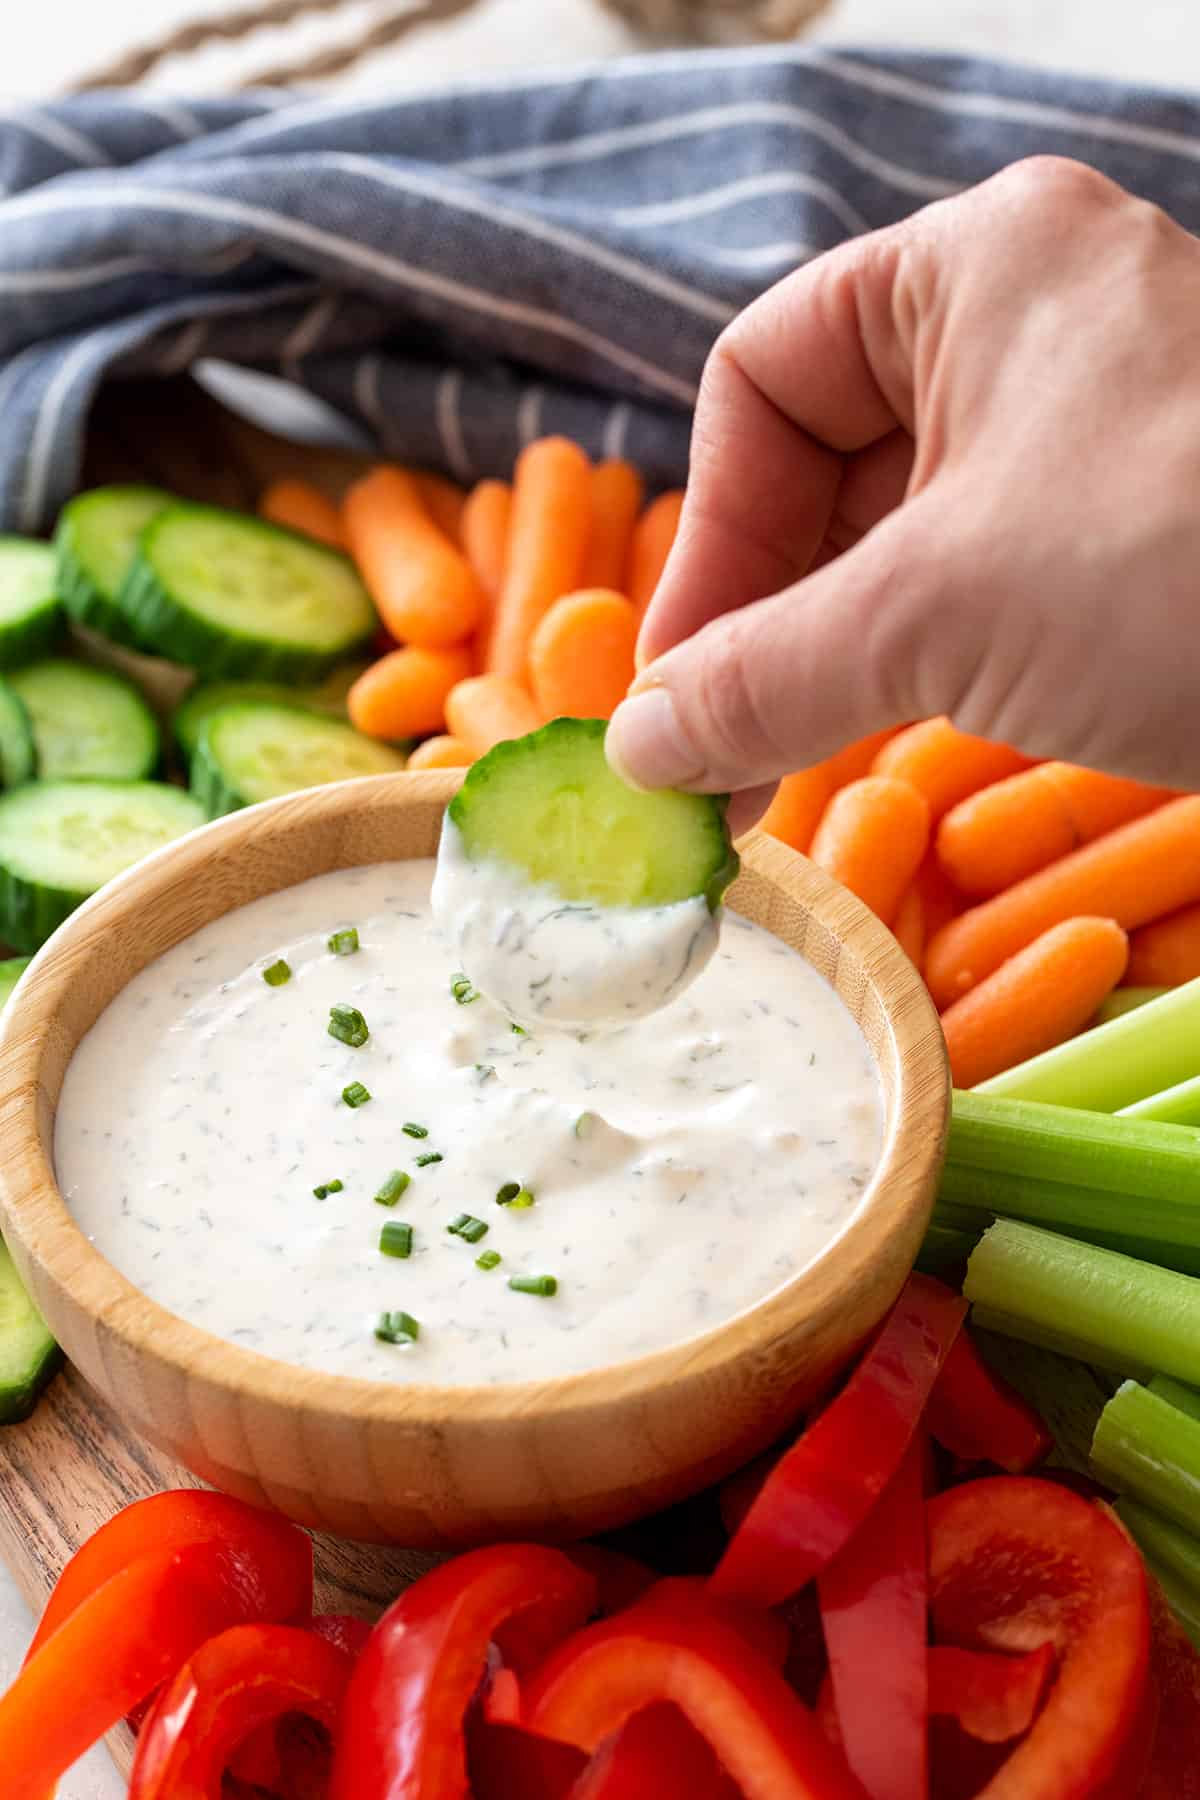 A hand dipping a cucumber into healthy ranch dip on a crudité platter.